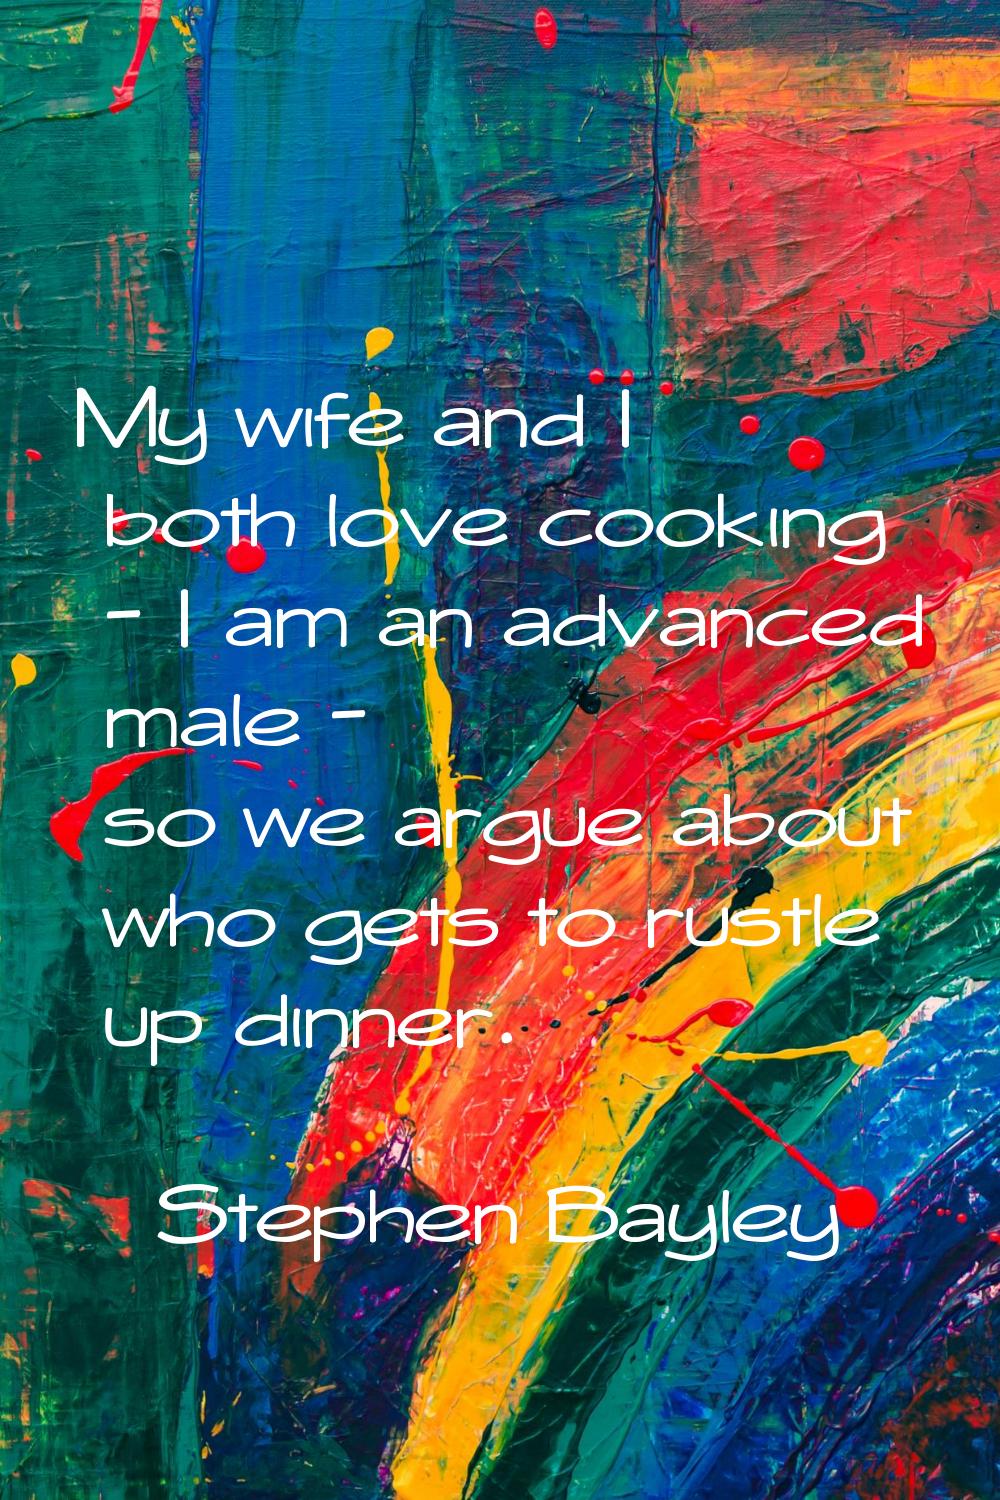 My wife and I both love cooking - I am an advanced male - so we argue about who gets to rustle up d